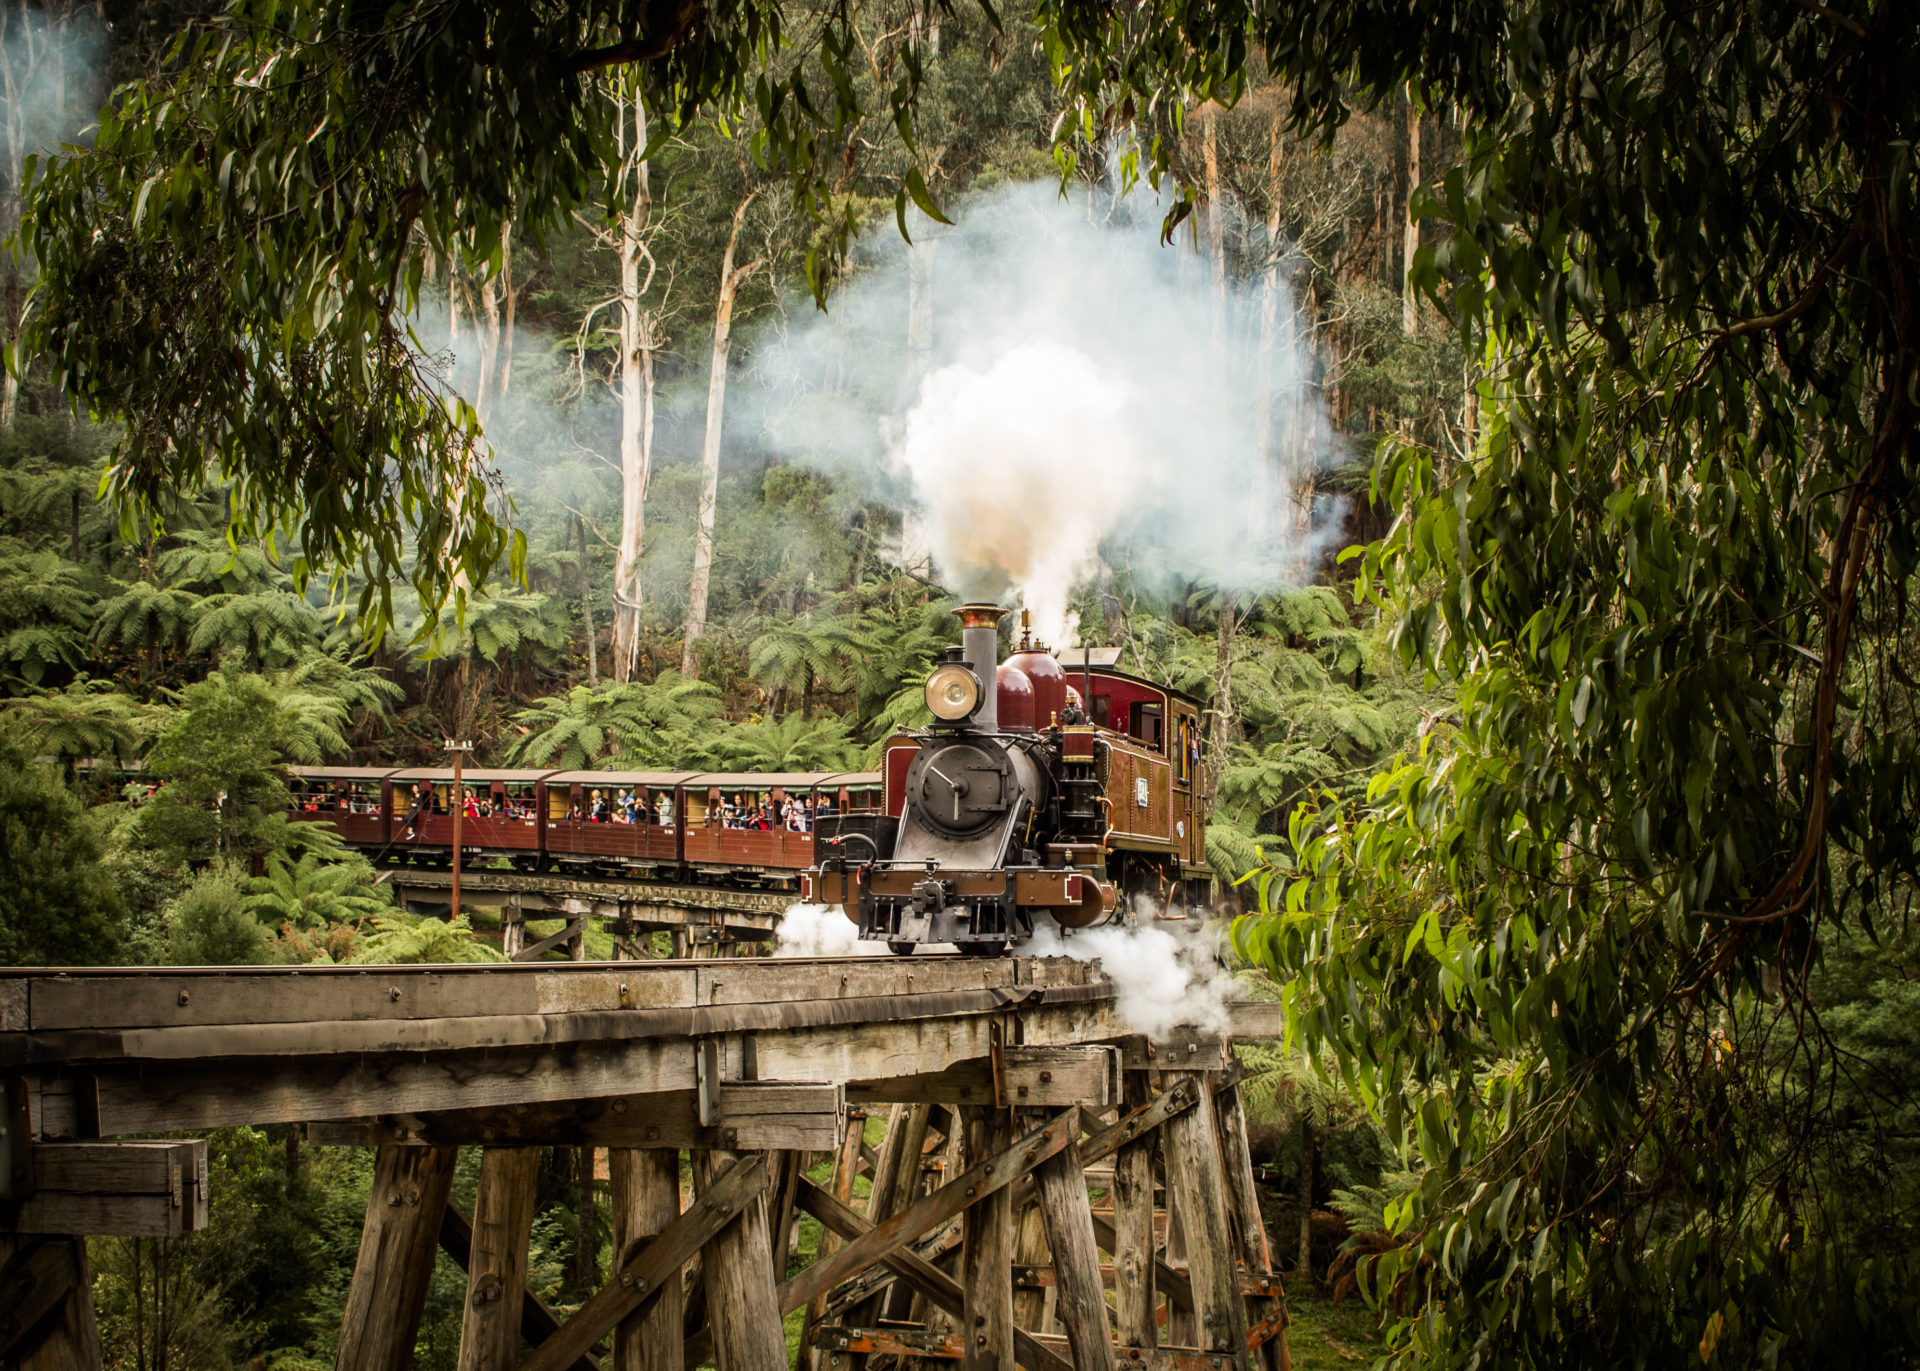 Puffing Billy's Excursion Train crosses the Monbulk Creek Trestle Bridge in Selby